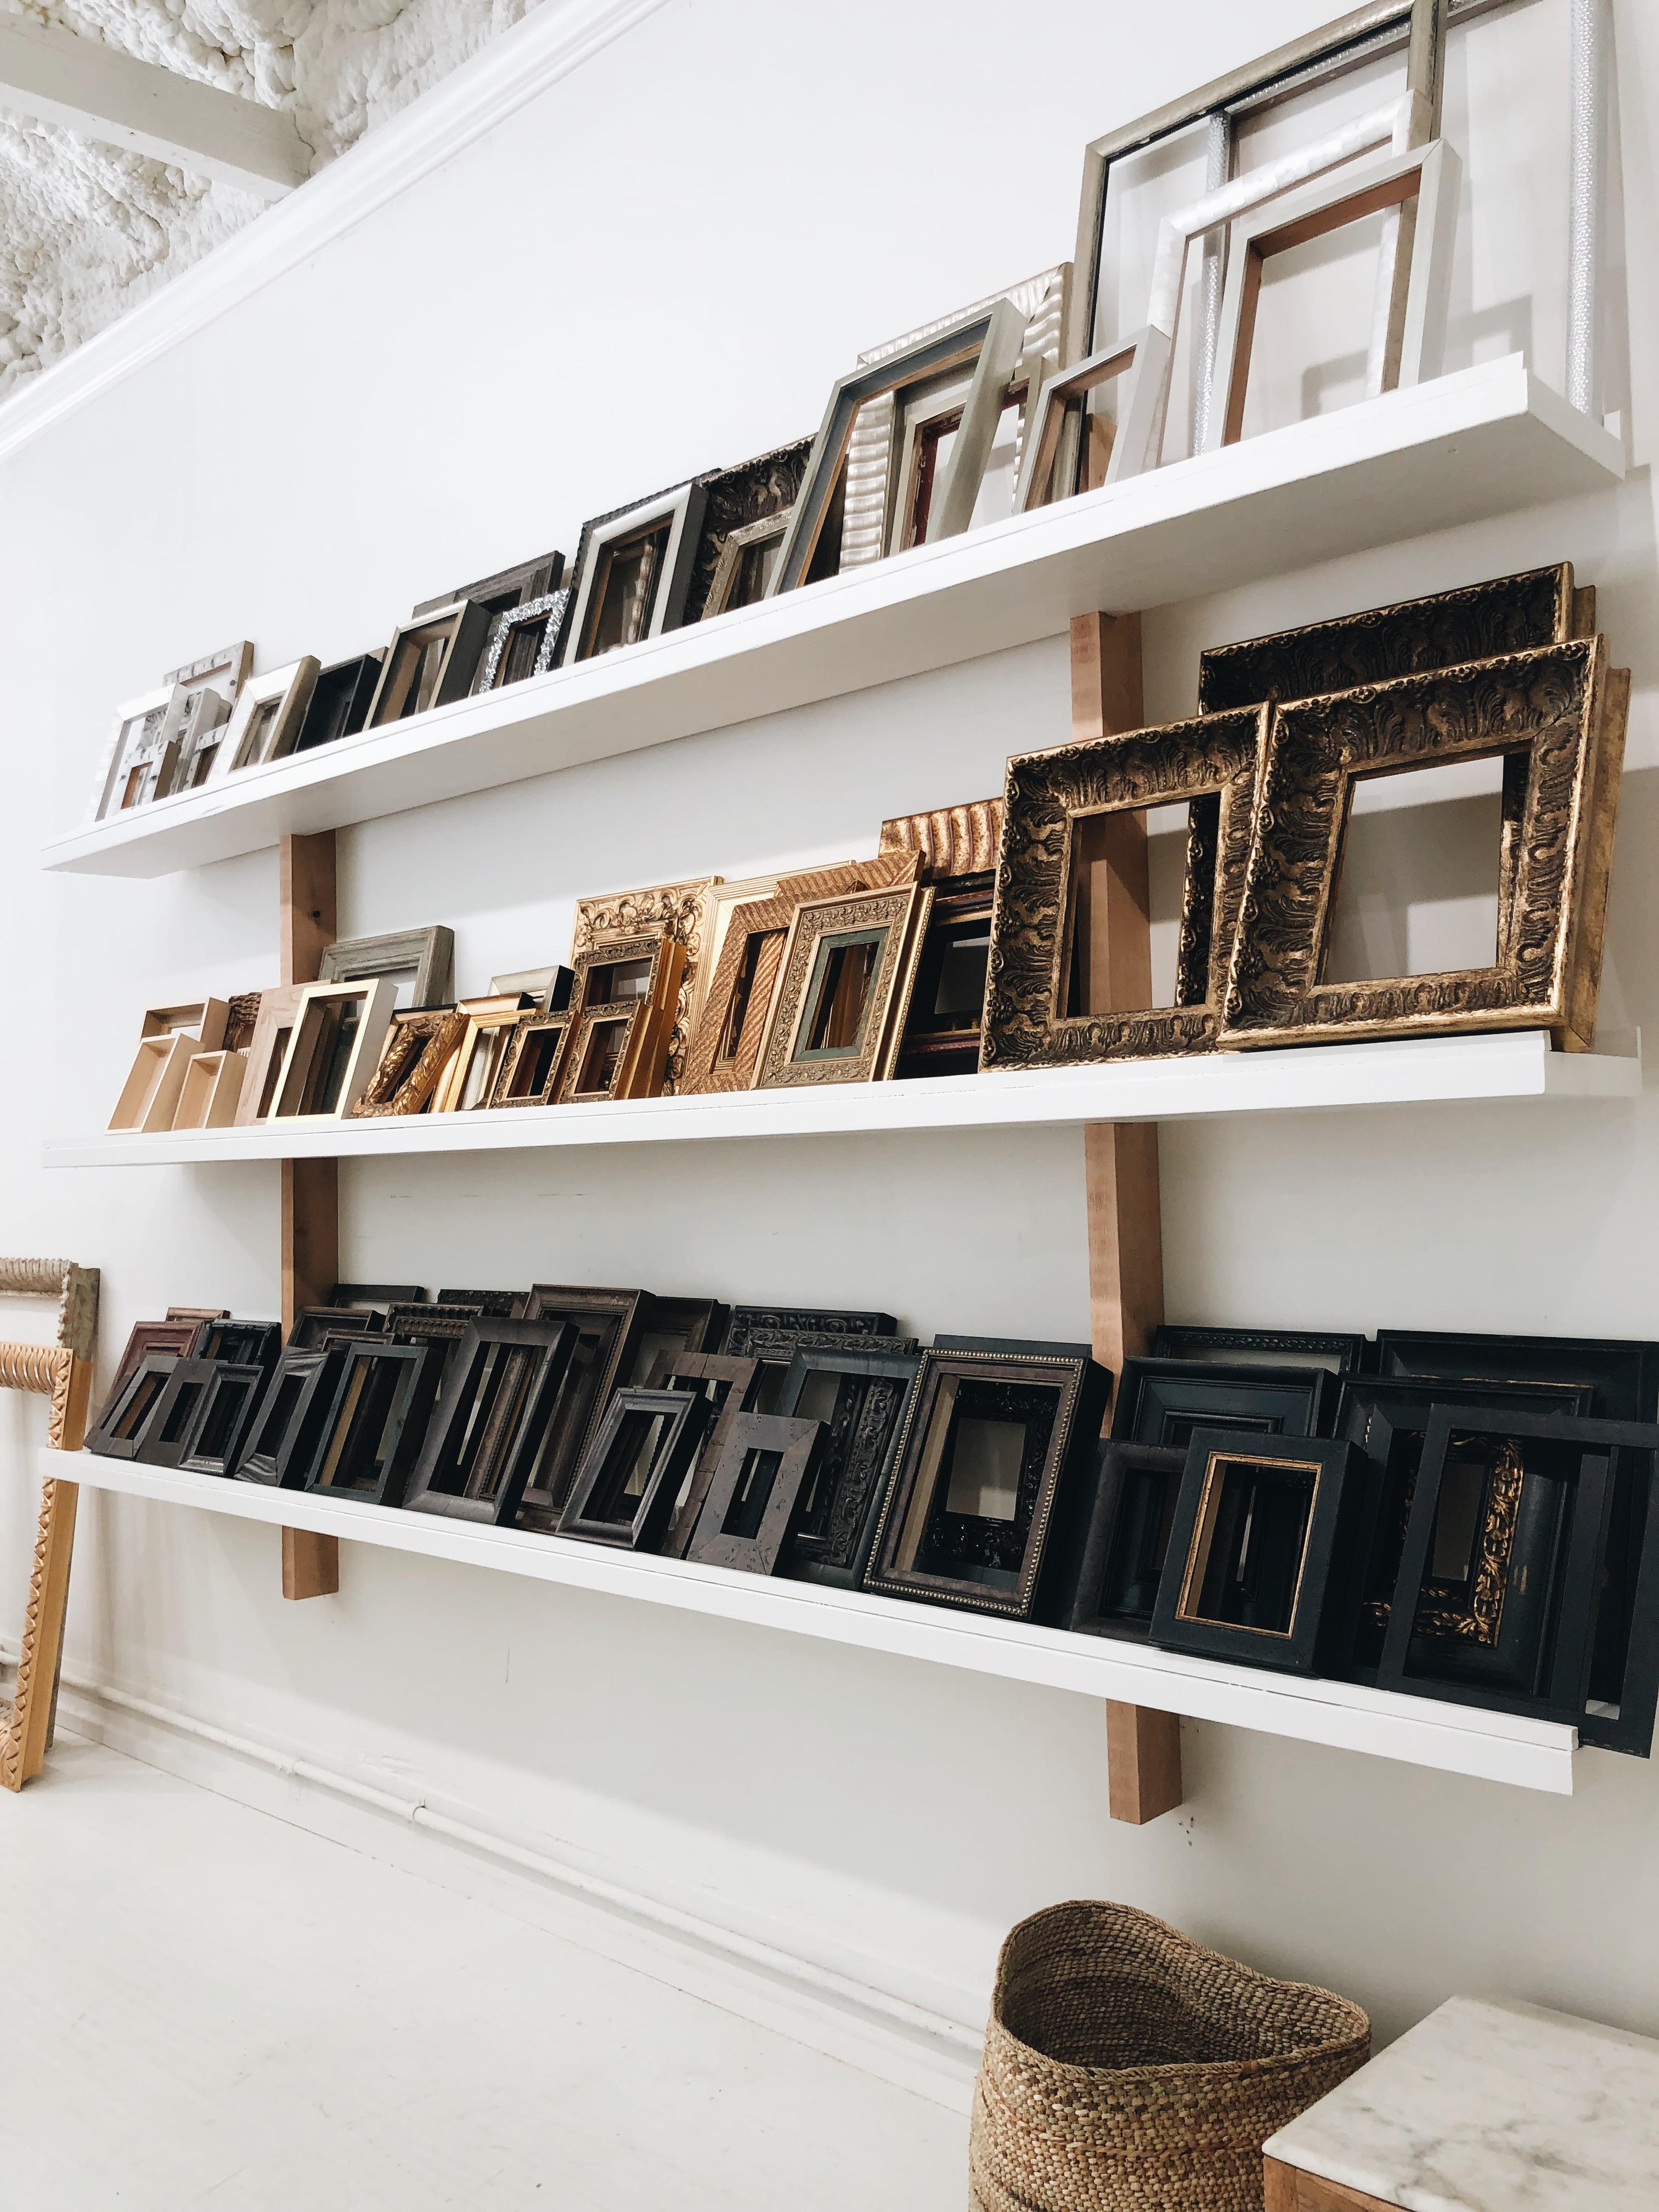 The Gallery Frame Shoppe + Goods Photo